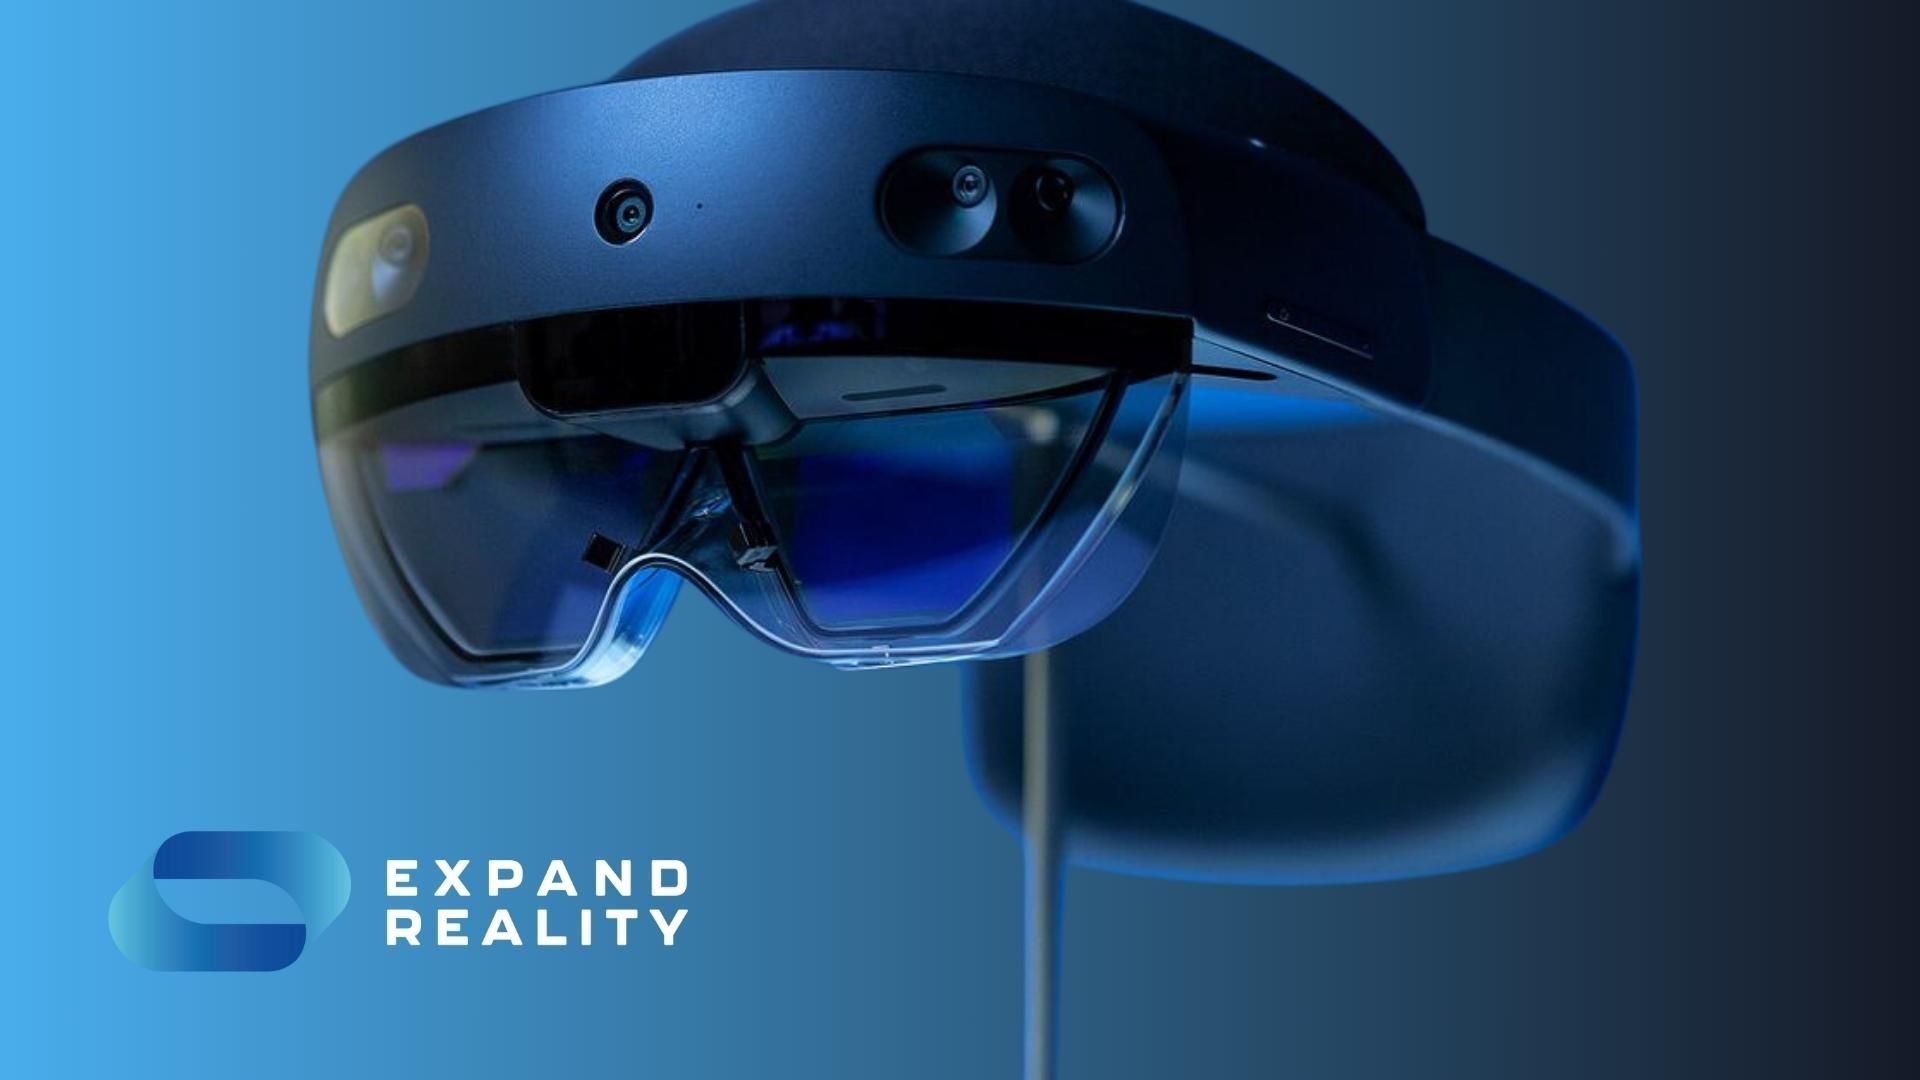 Microsoft HoloLens 2 is one of the most advanced MR headsets on the market. Join us as we run down 4 real-life case studies that show off its versatility.
